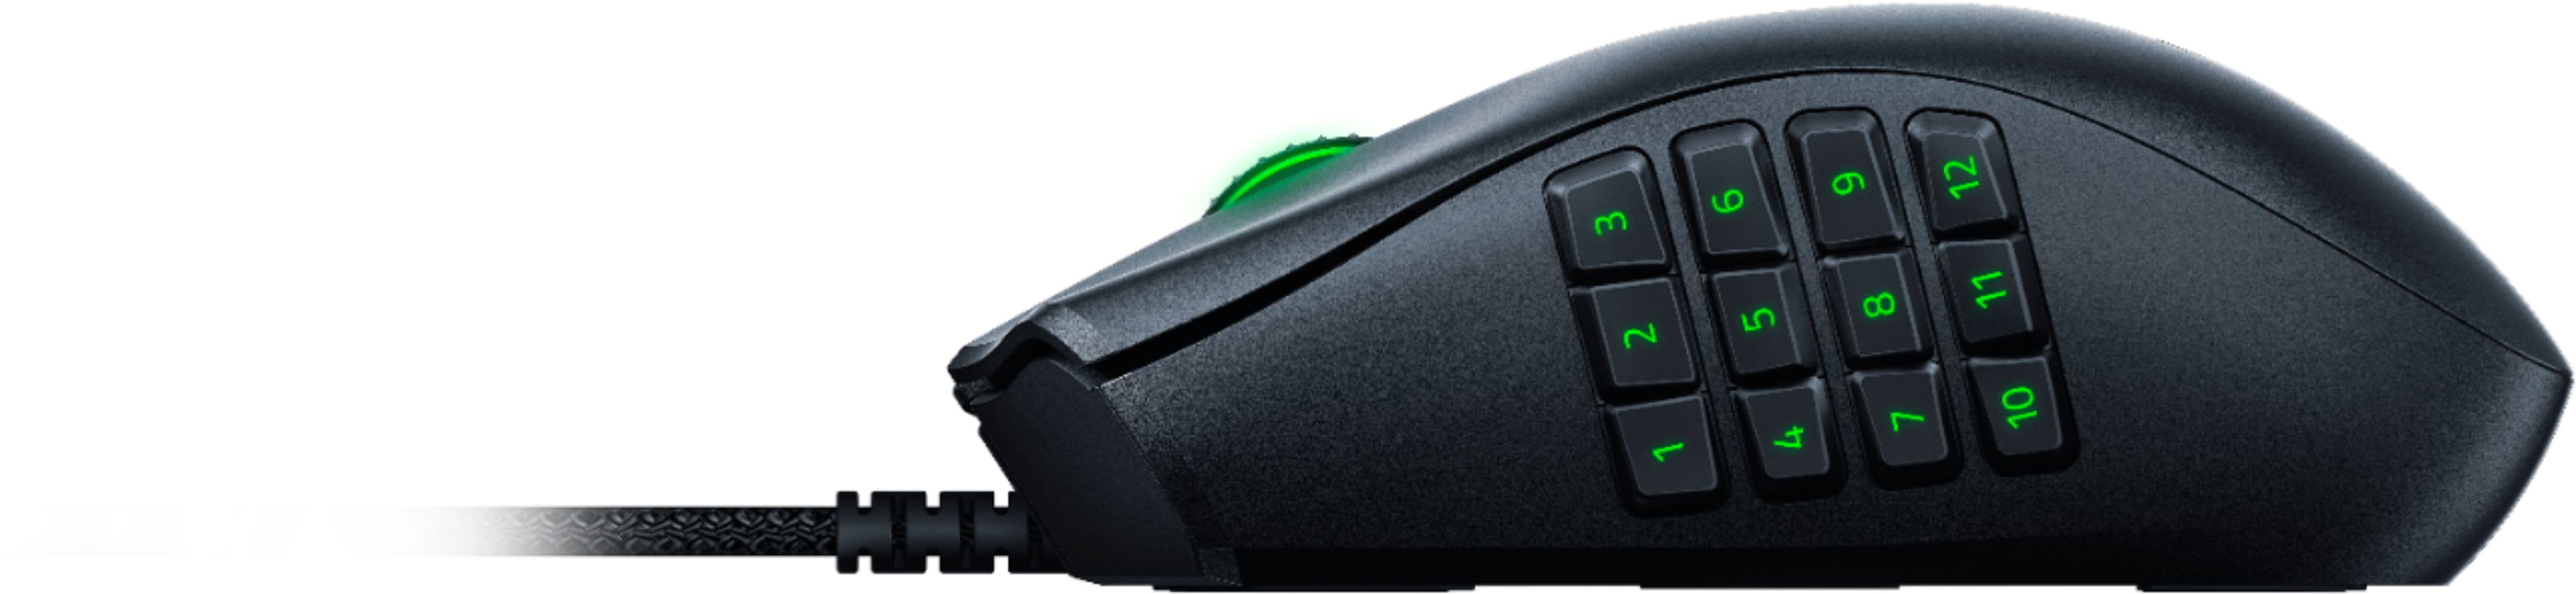 Left View: Razer - Naga X Wired with 16 buttons and Chroma RGB Lighting Optical Gaming Mouse - Black